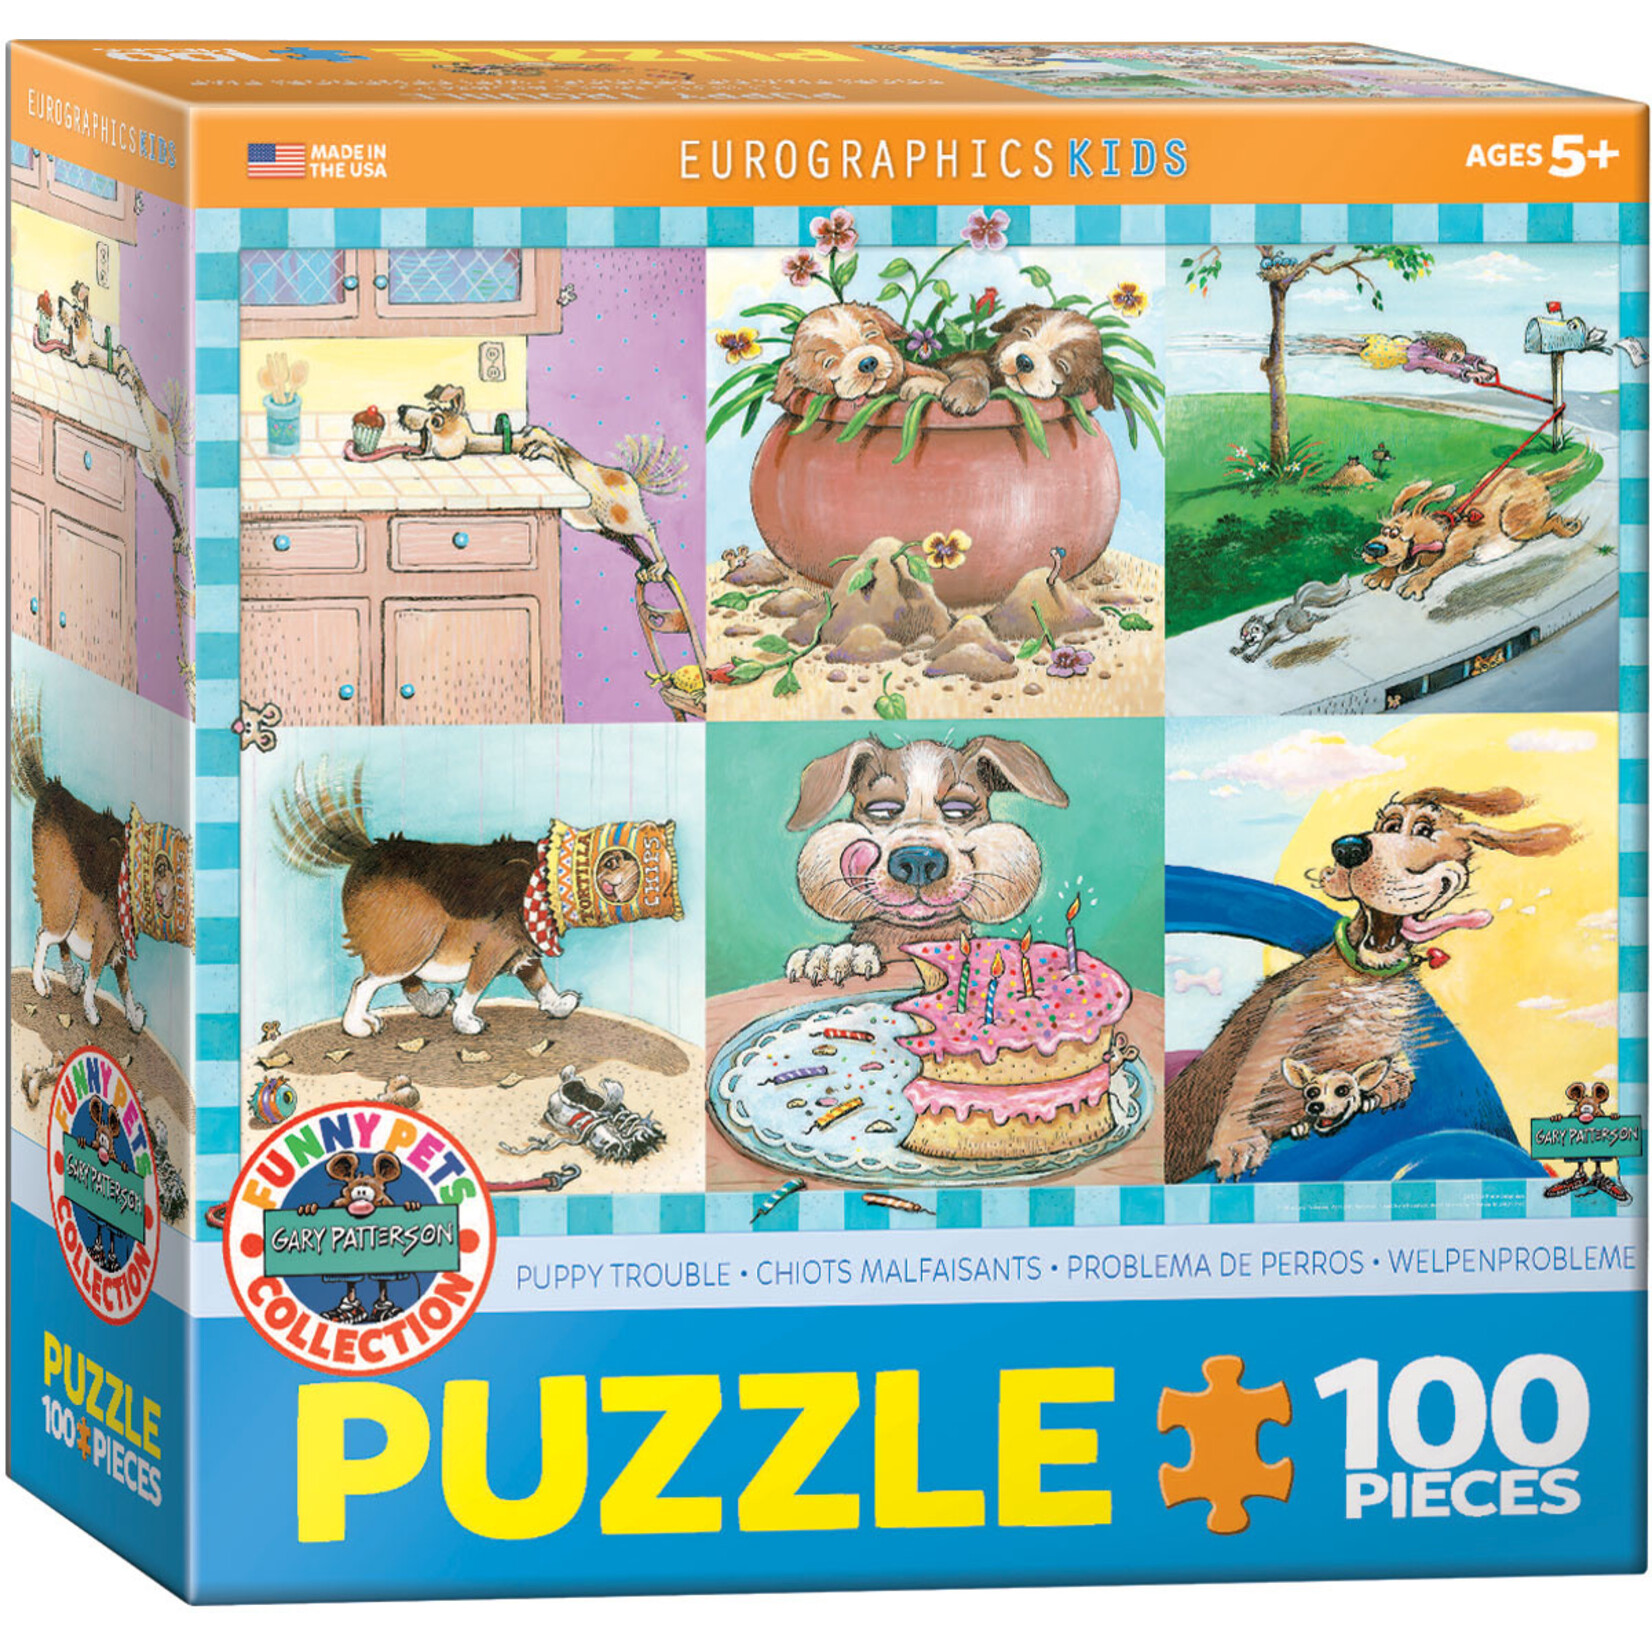 EuroGraphics Puzzles Puppy Trouble 100pc